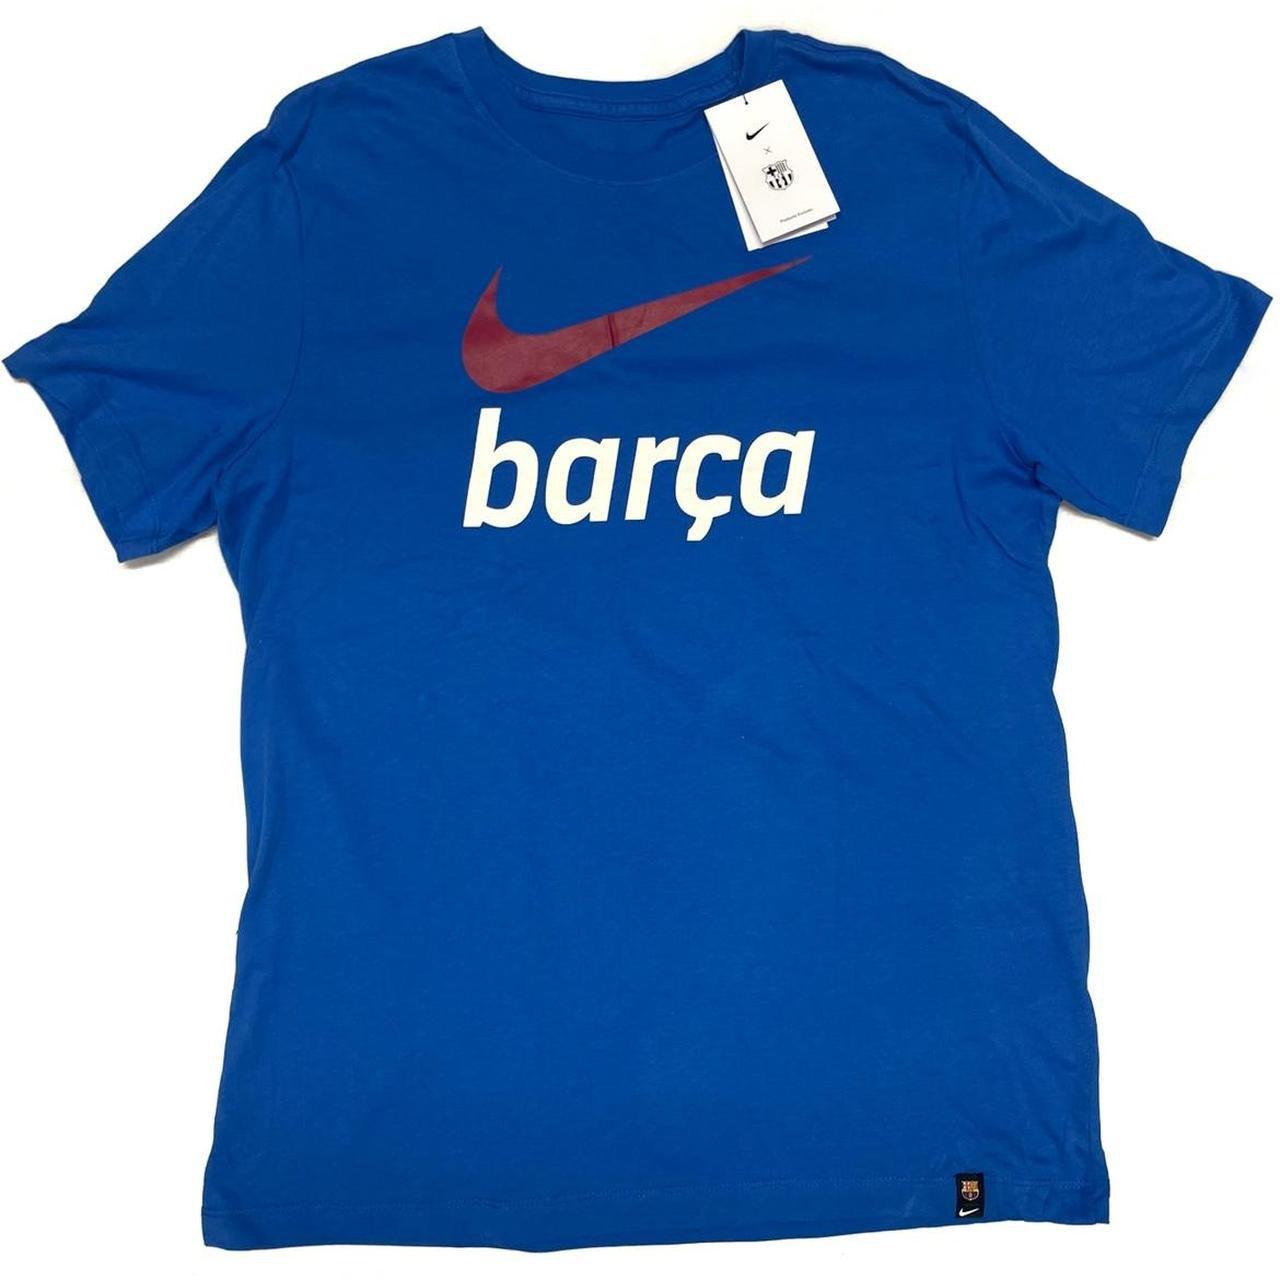 Nike ‘Barca’ Tee ( L & S ) - Known Source